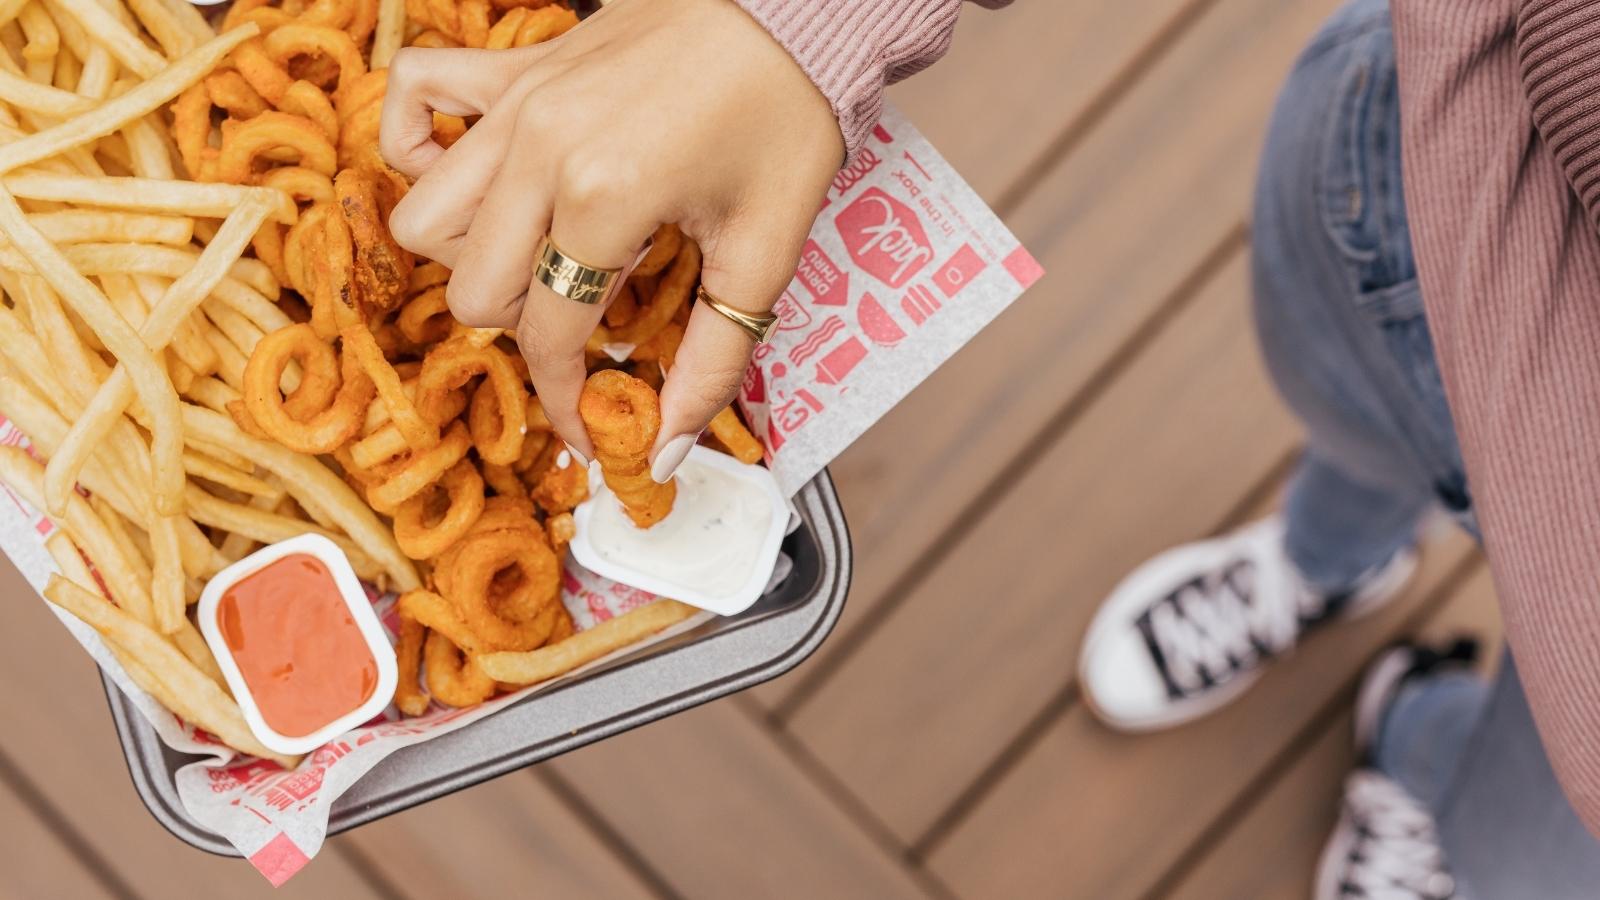 5 Reasons to Purchase a Jack in the Box Franchise